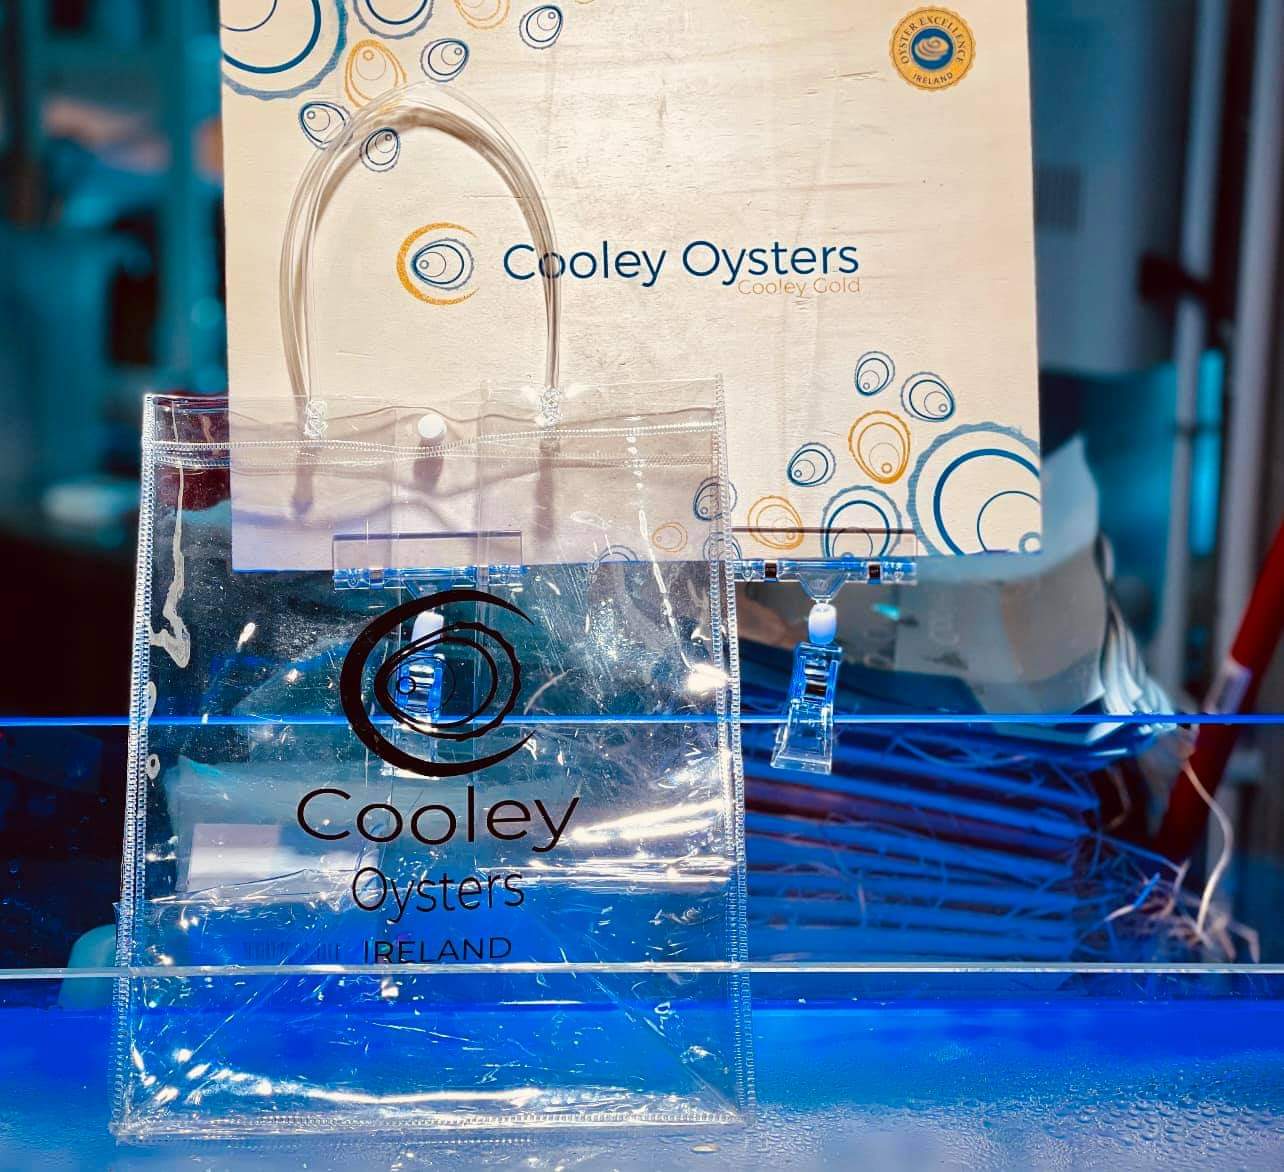 Cooley Oysters® 購物袋(小) Cooley Oysters® Shopping Bag ( S )